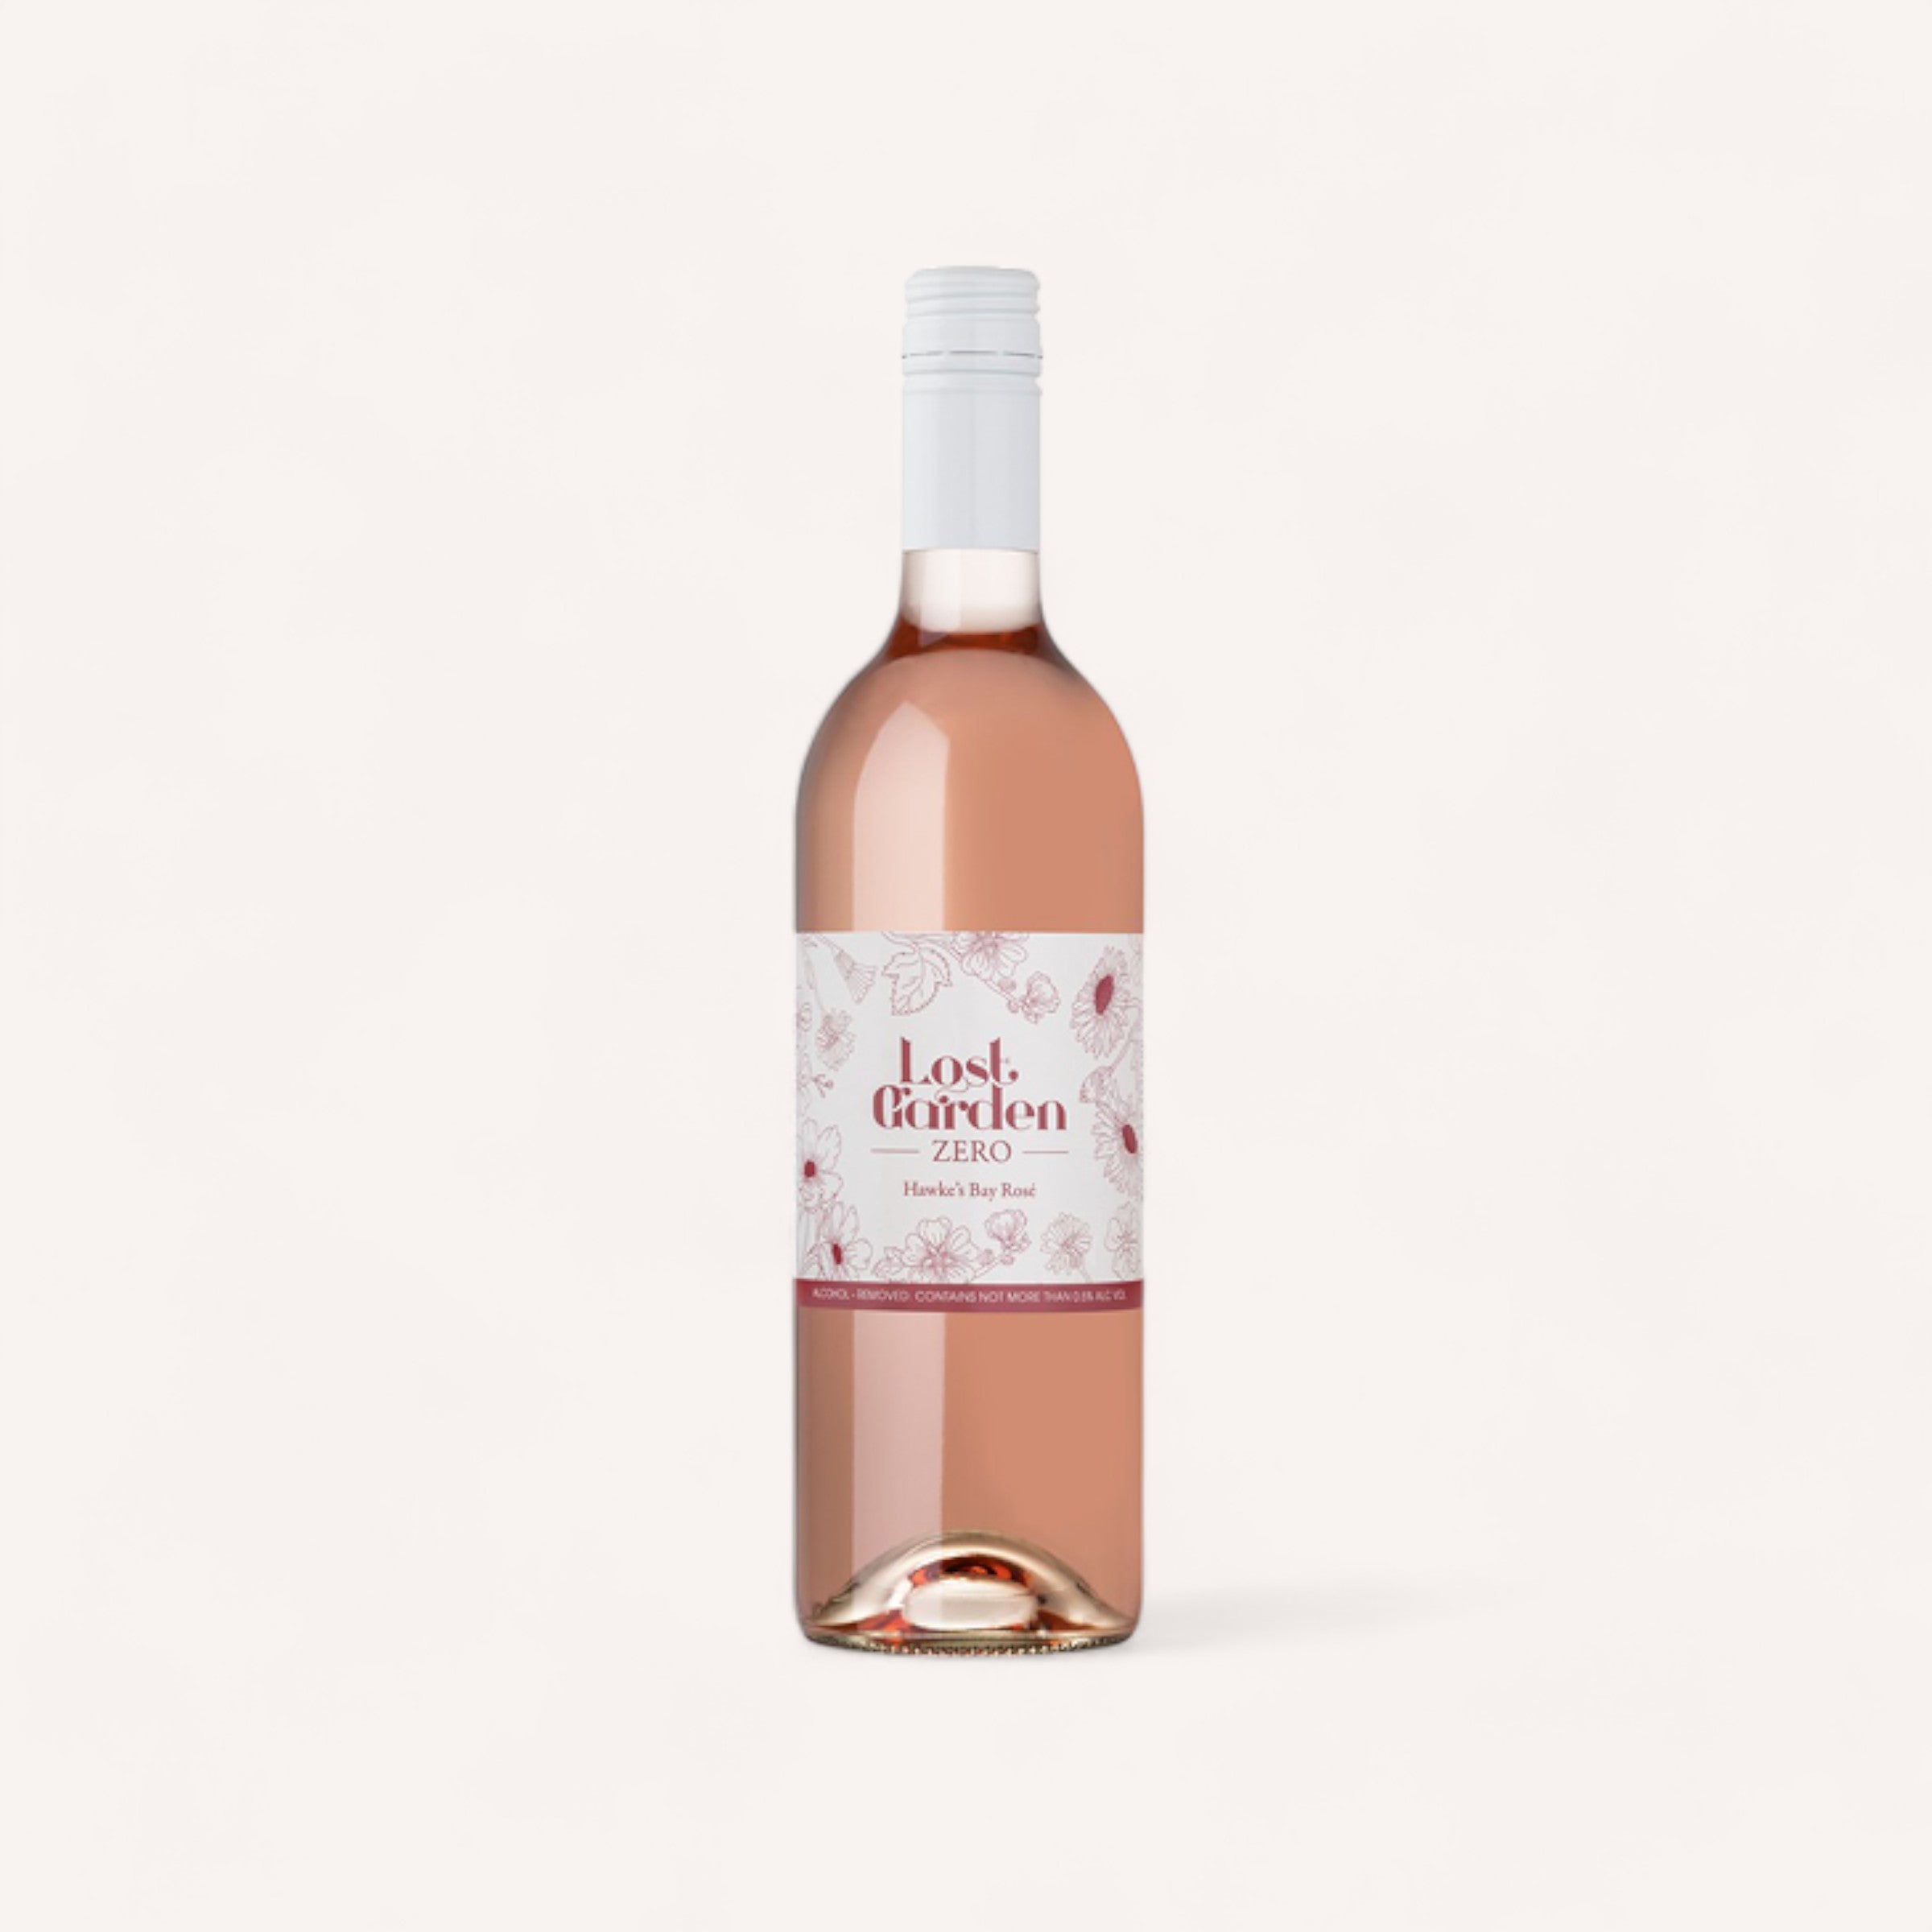 A bottle of Trinity Hill Hawkes Bay Rose wine with a label that reads "Lost Garden Zero" against a white background.